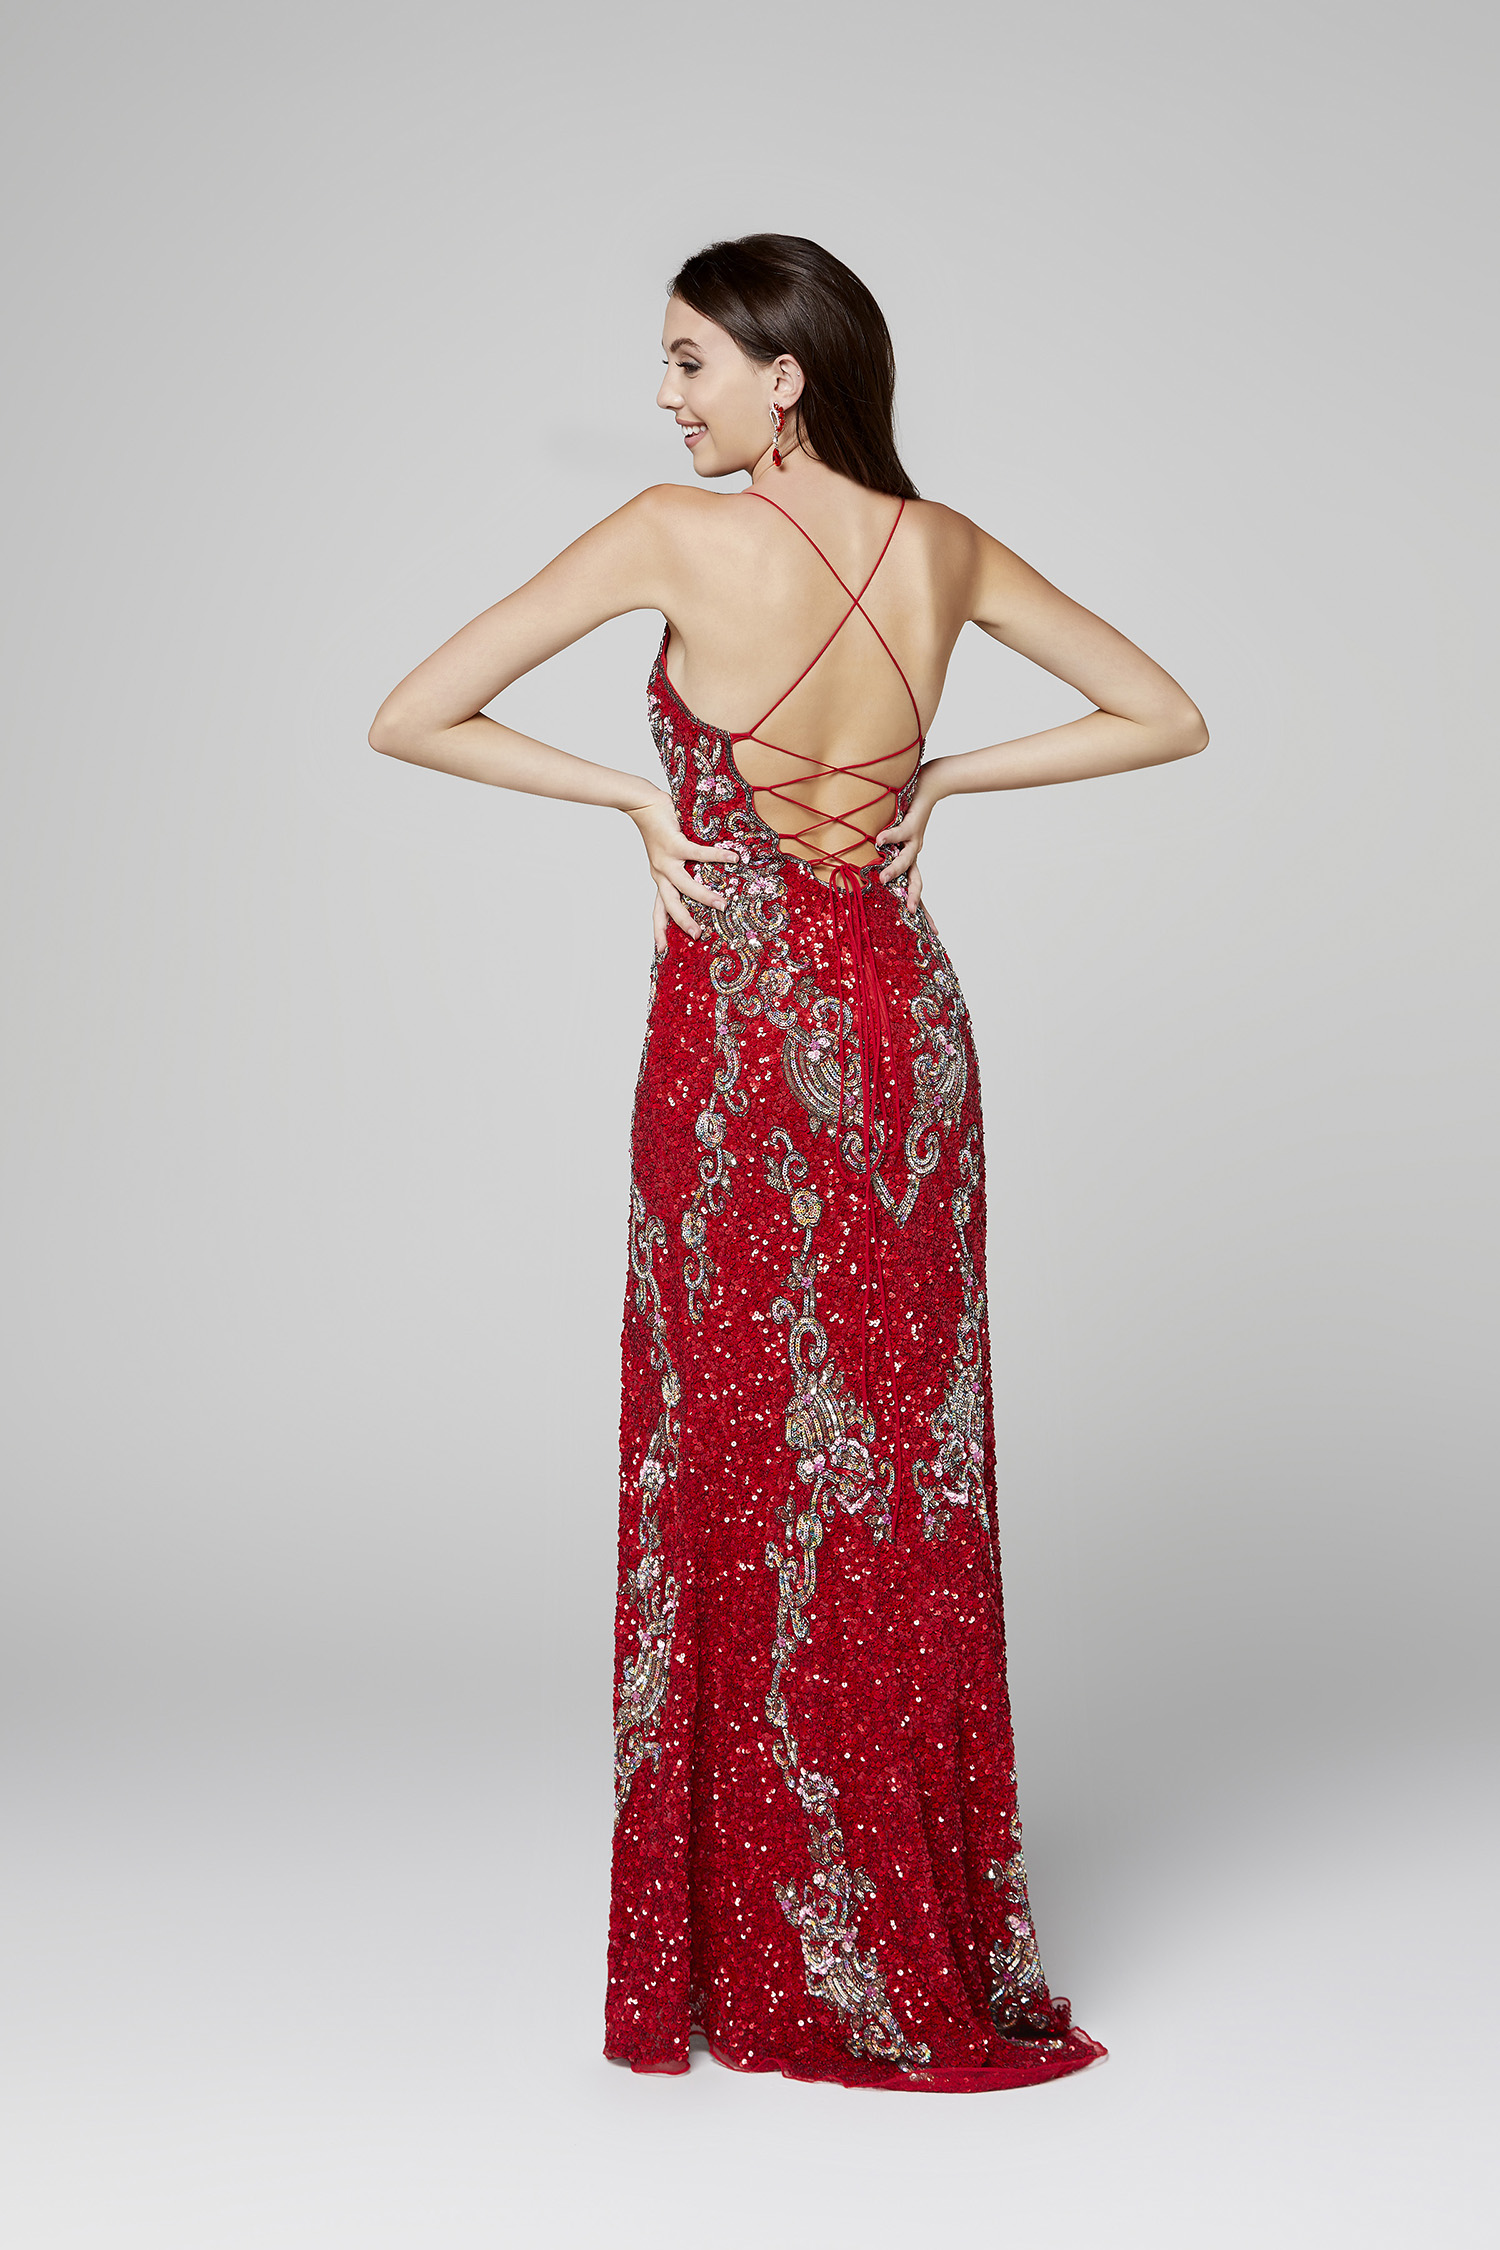 Primavera Couture | Product Categories SPRING PROM 2020